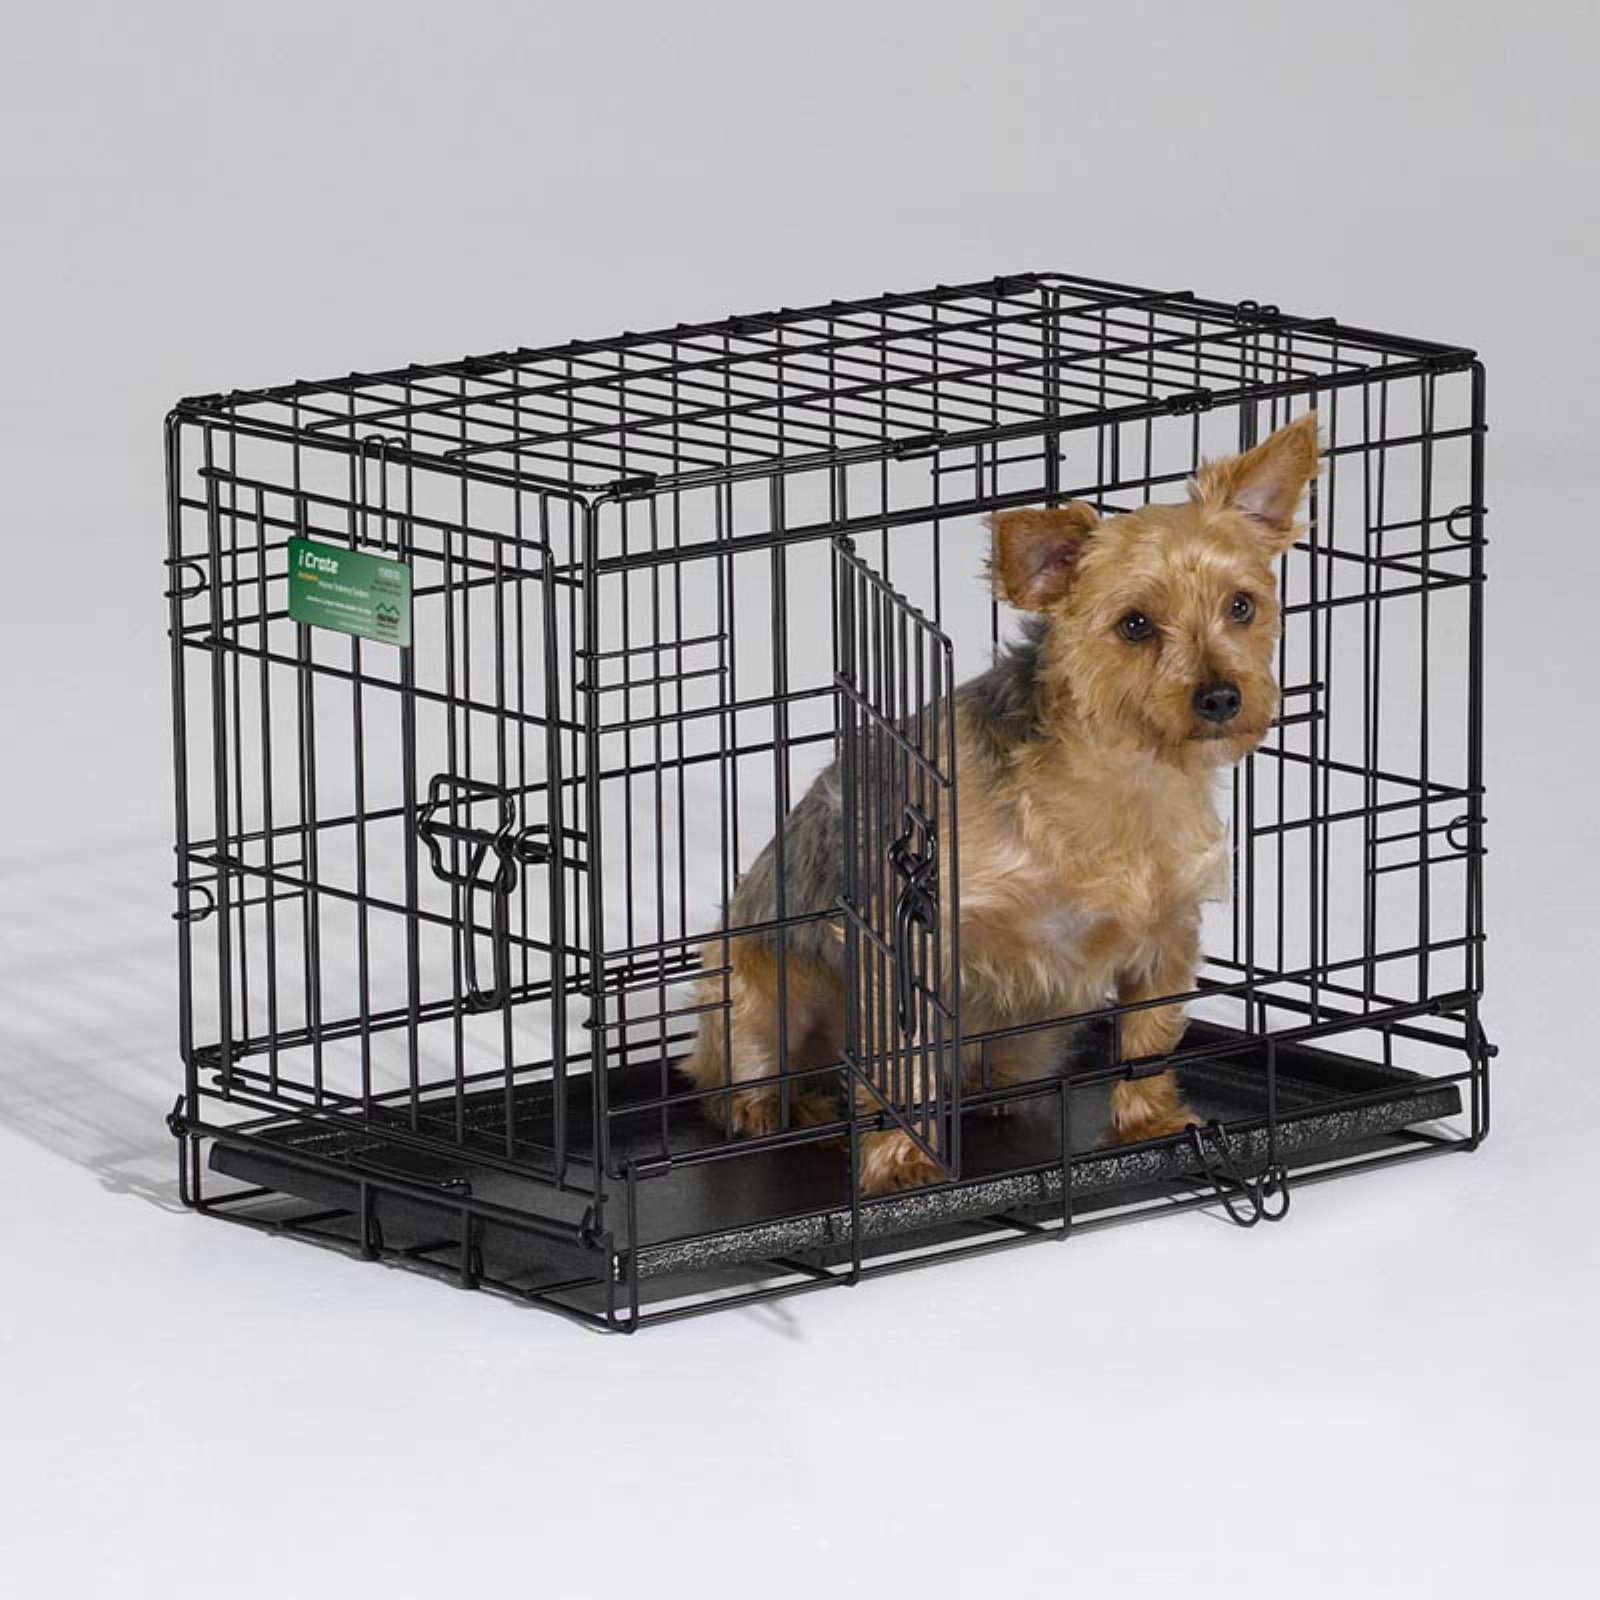 MidWest Homes For Pets Double Door iCrate Metal Dog Crate, 36" - image 5 of 10